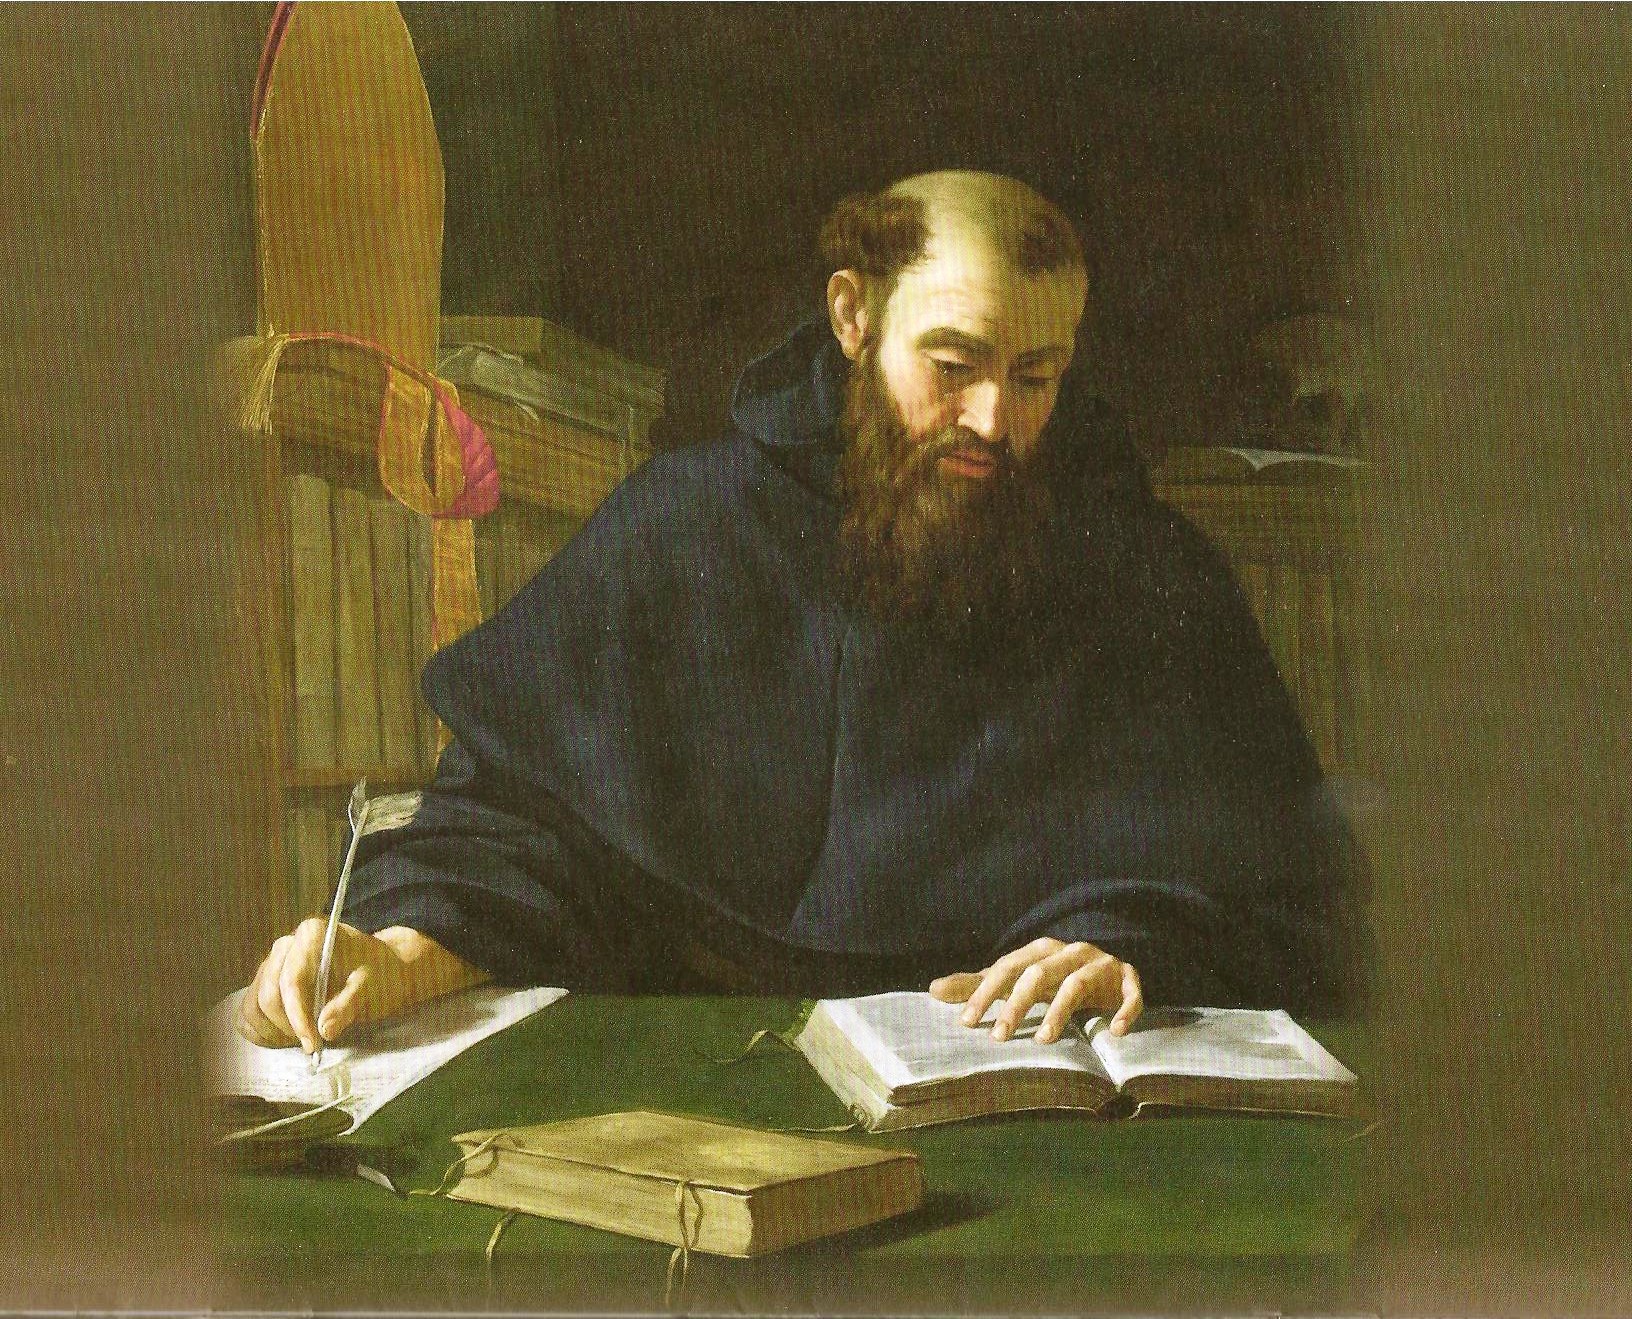 Painting of St. Augustine writing his rule